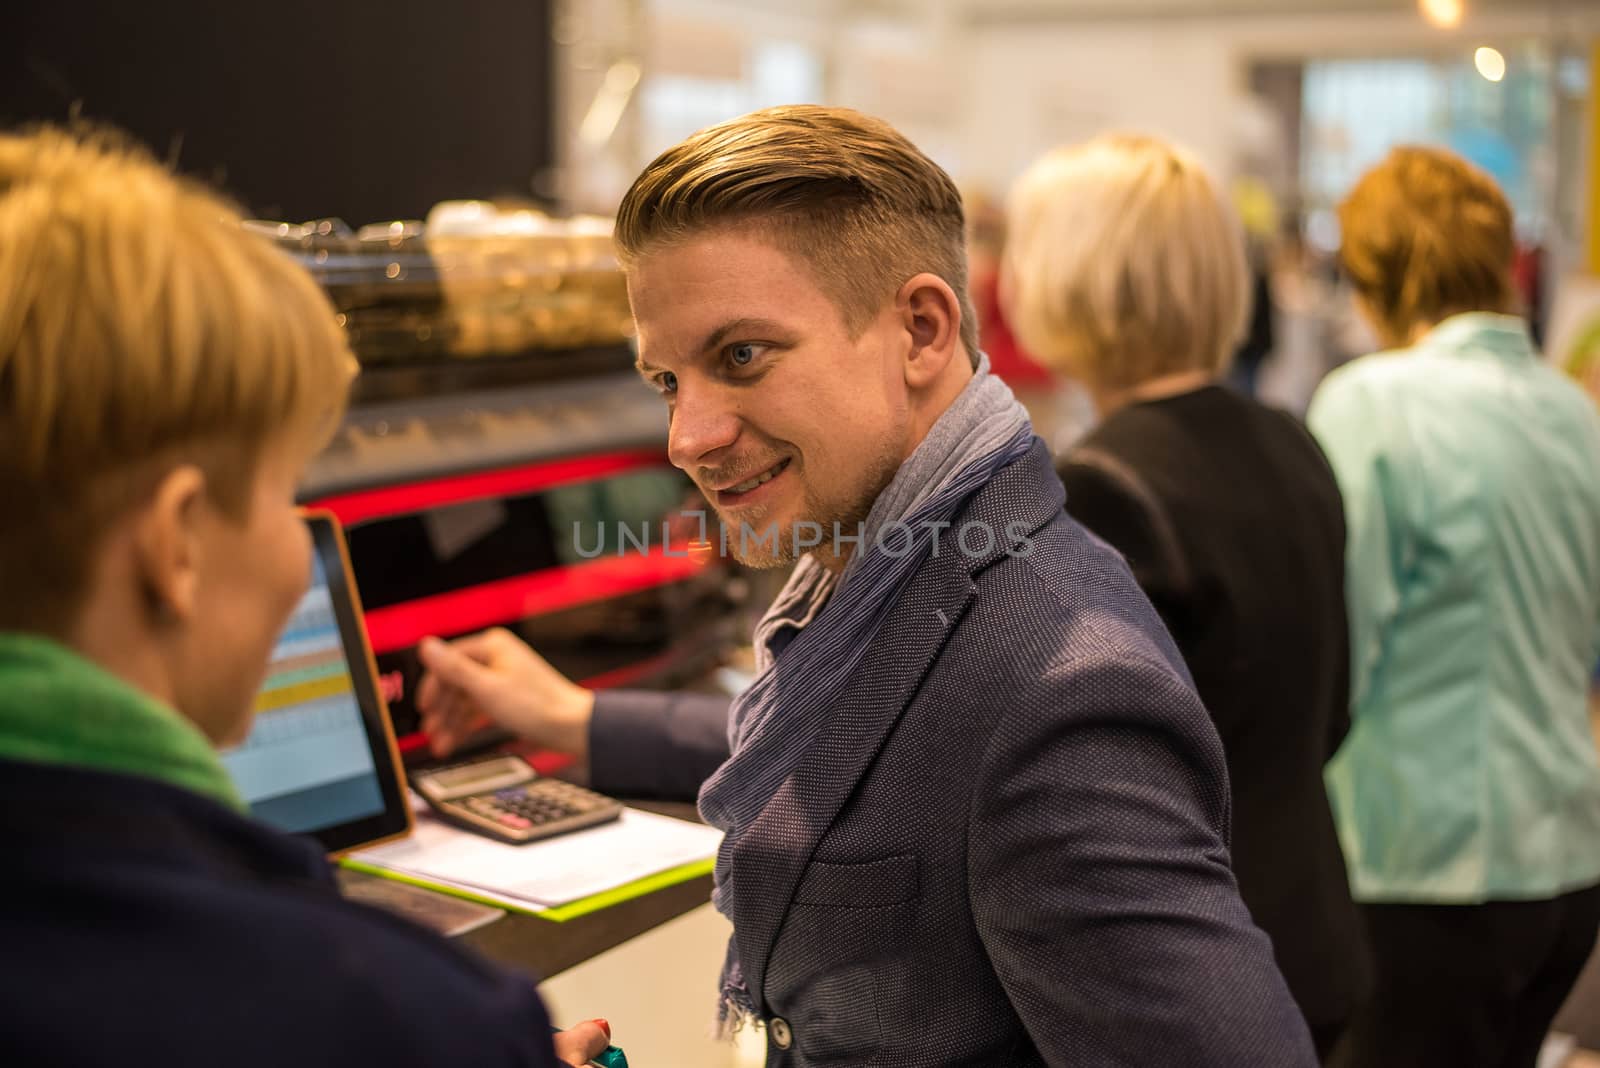 03/04/2018. Brno, Czech Republic. Sales person discussing a product he is offering to a potential client at a convention trade center. Brno Exhibition center. Czech Republic by gonzalobell